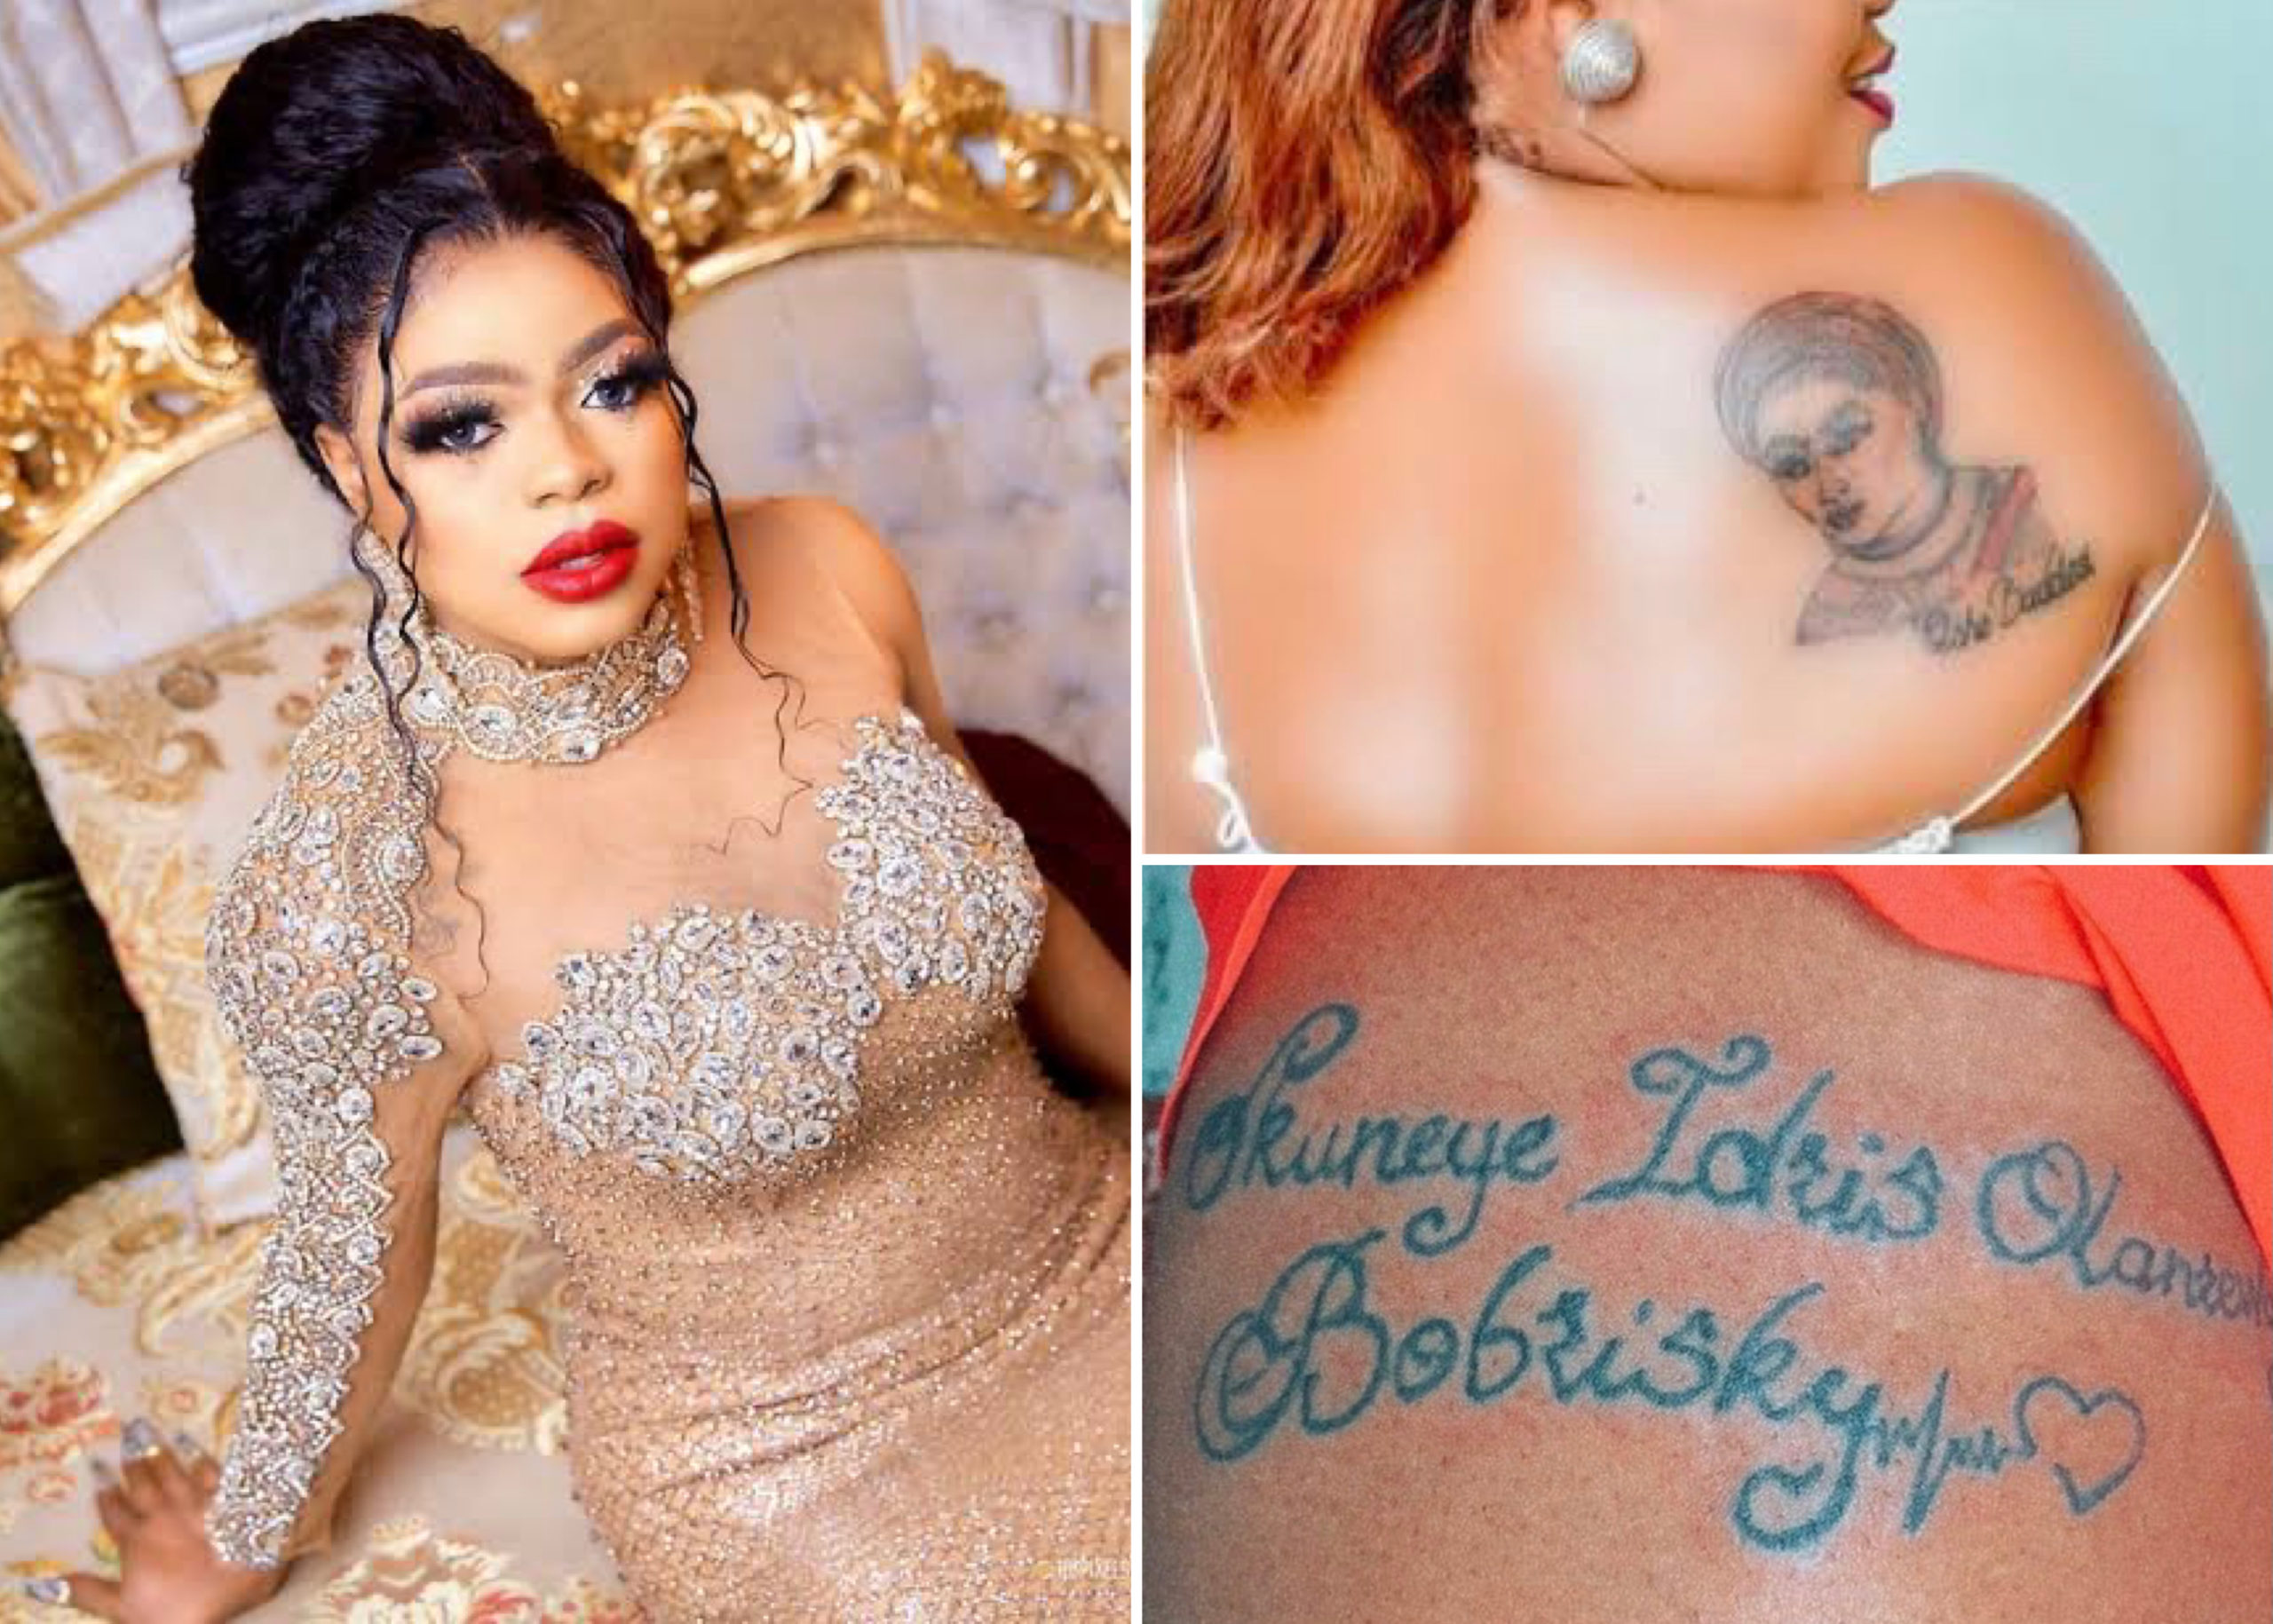 Bobrisky To Share N3m Among Fans Who Have A Tattoo Of Him, Promises Free Trip To Dubai